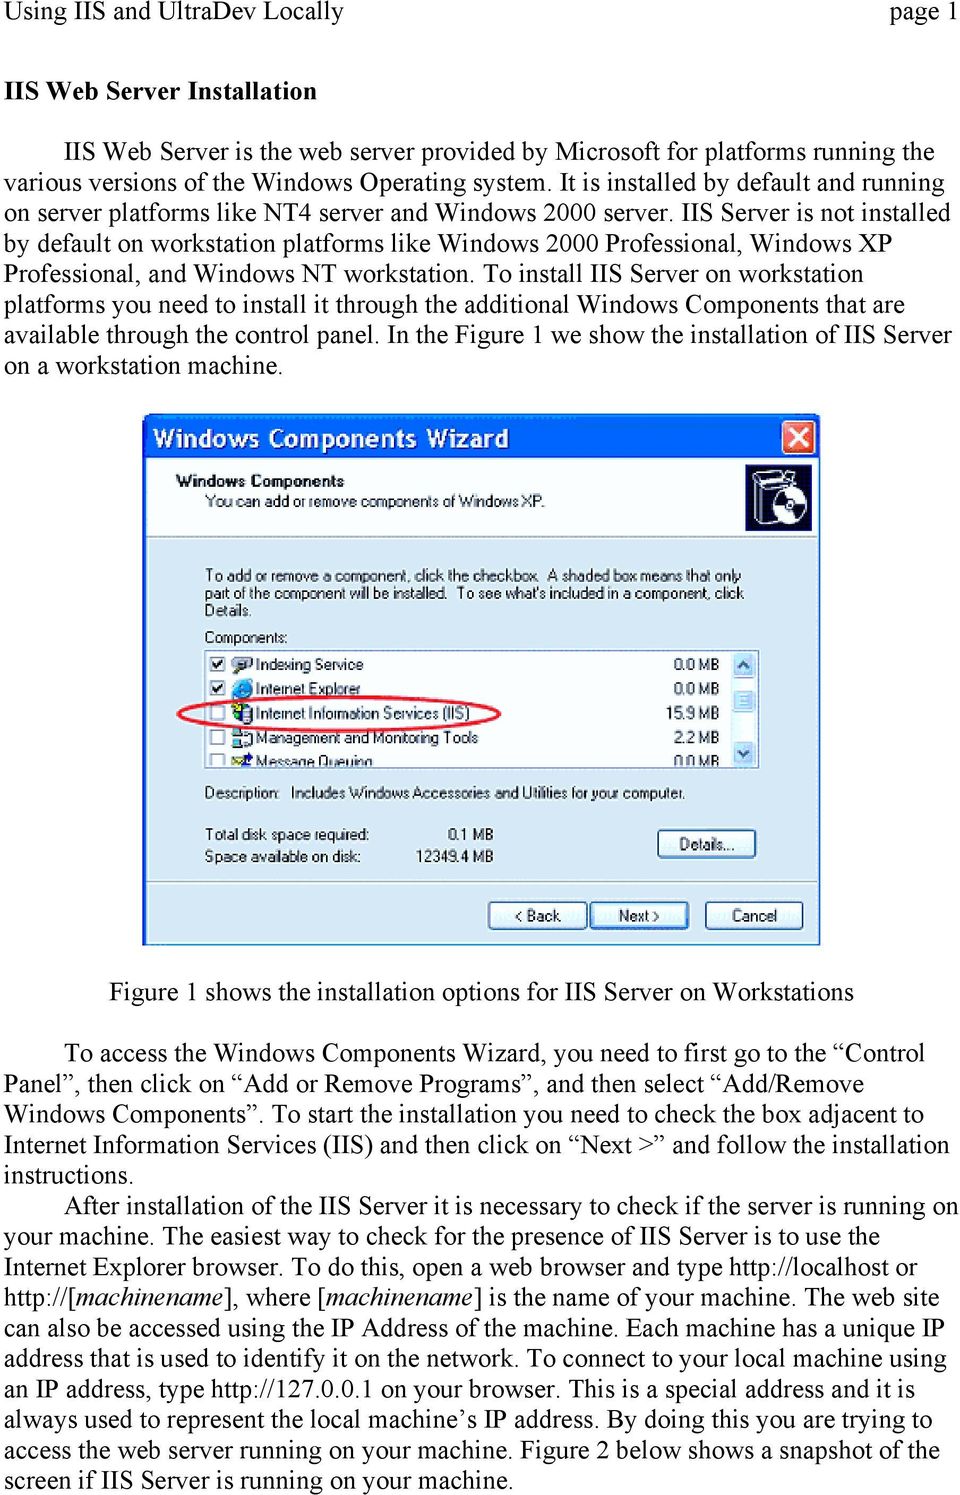 IIS Server is not installed by default on workstation platforms like Windows 2000 Professional, Windows XP Professional, and Windows NT workstation.